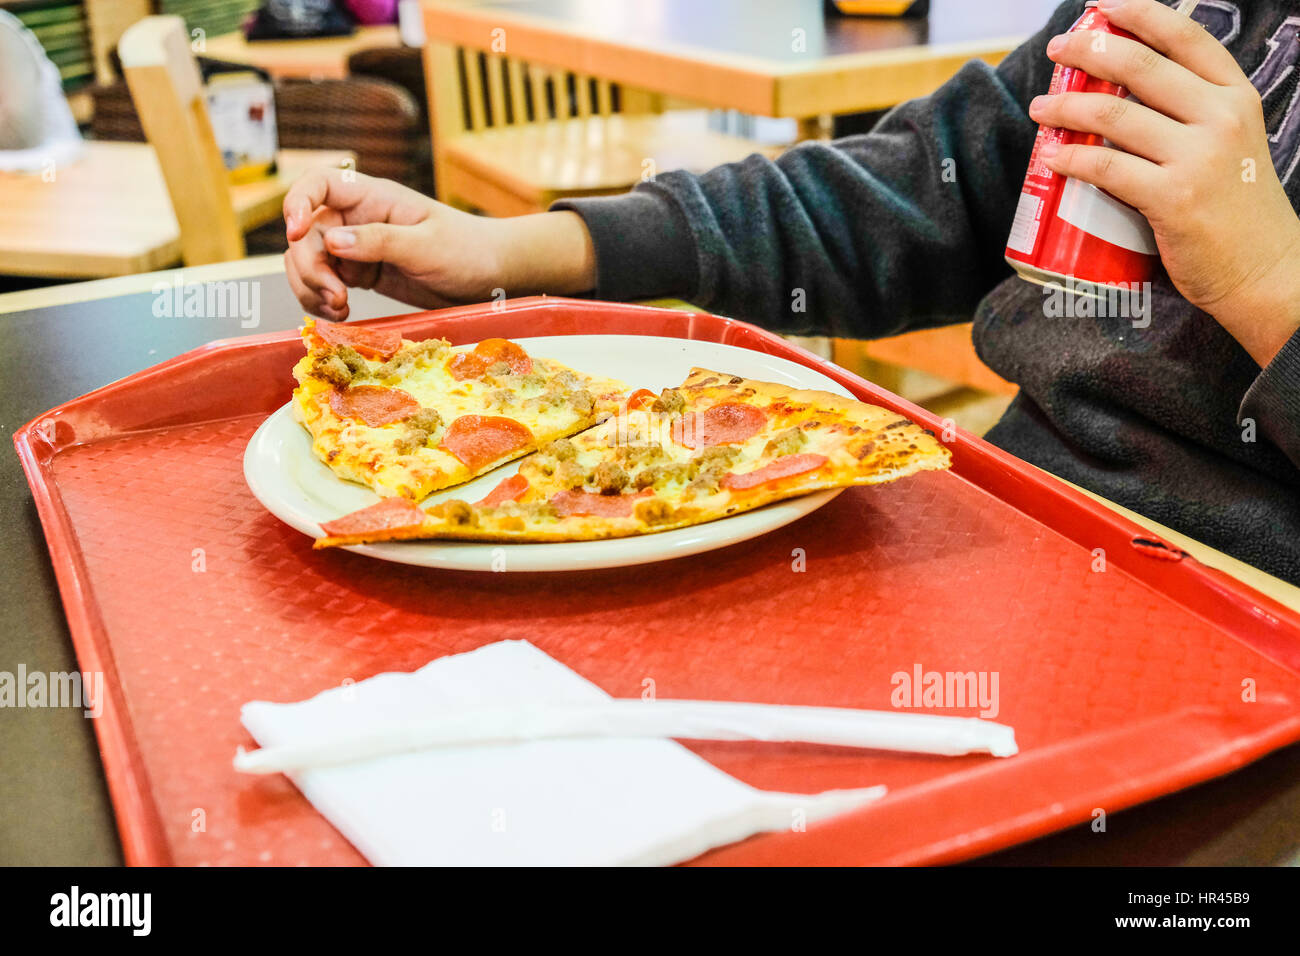 A Boy Eating Pizza and Drinking Coke in a Food Court Stock Photo